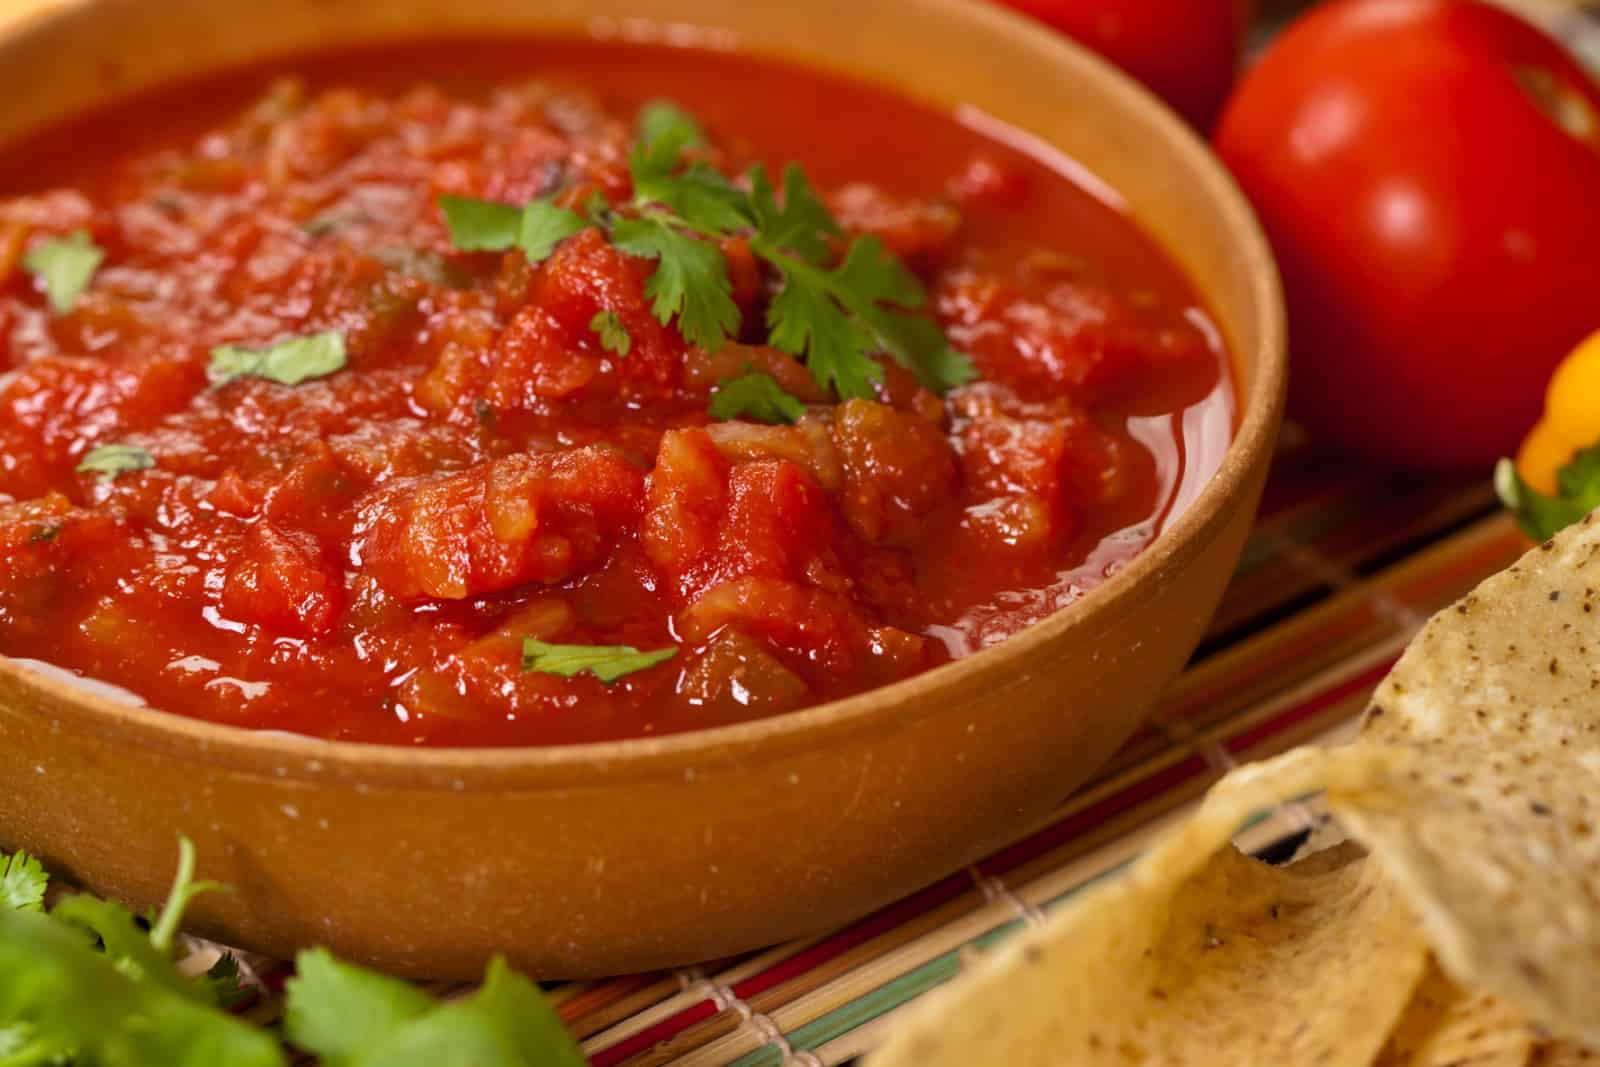 Bowl of red salsa with tortilla chips, mexican cuisine